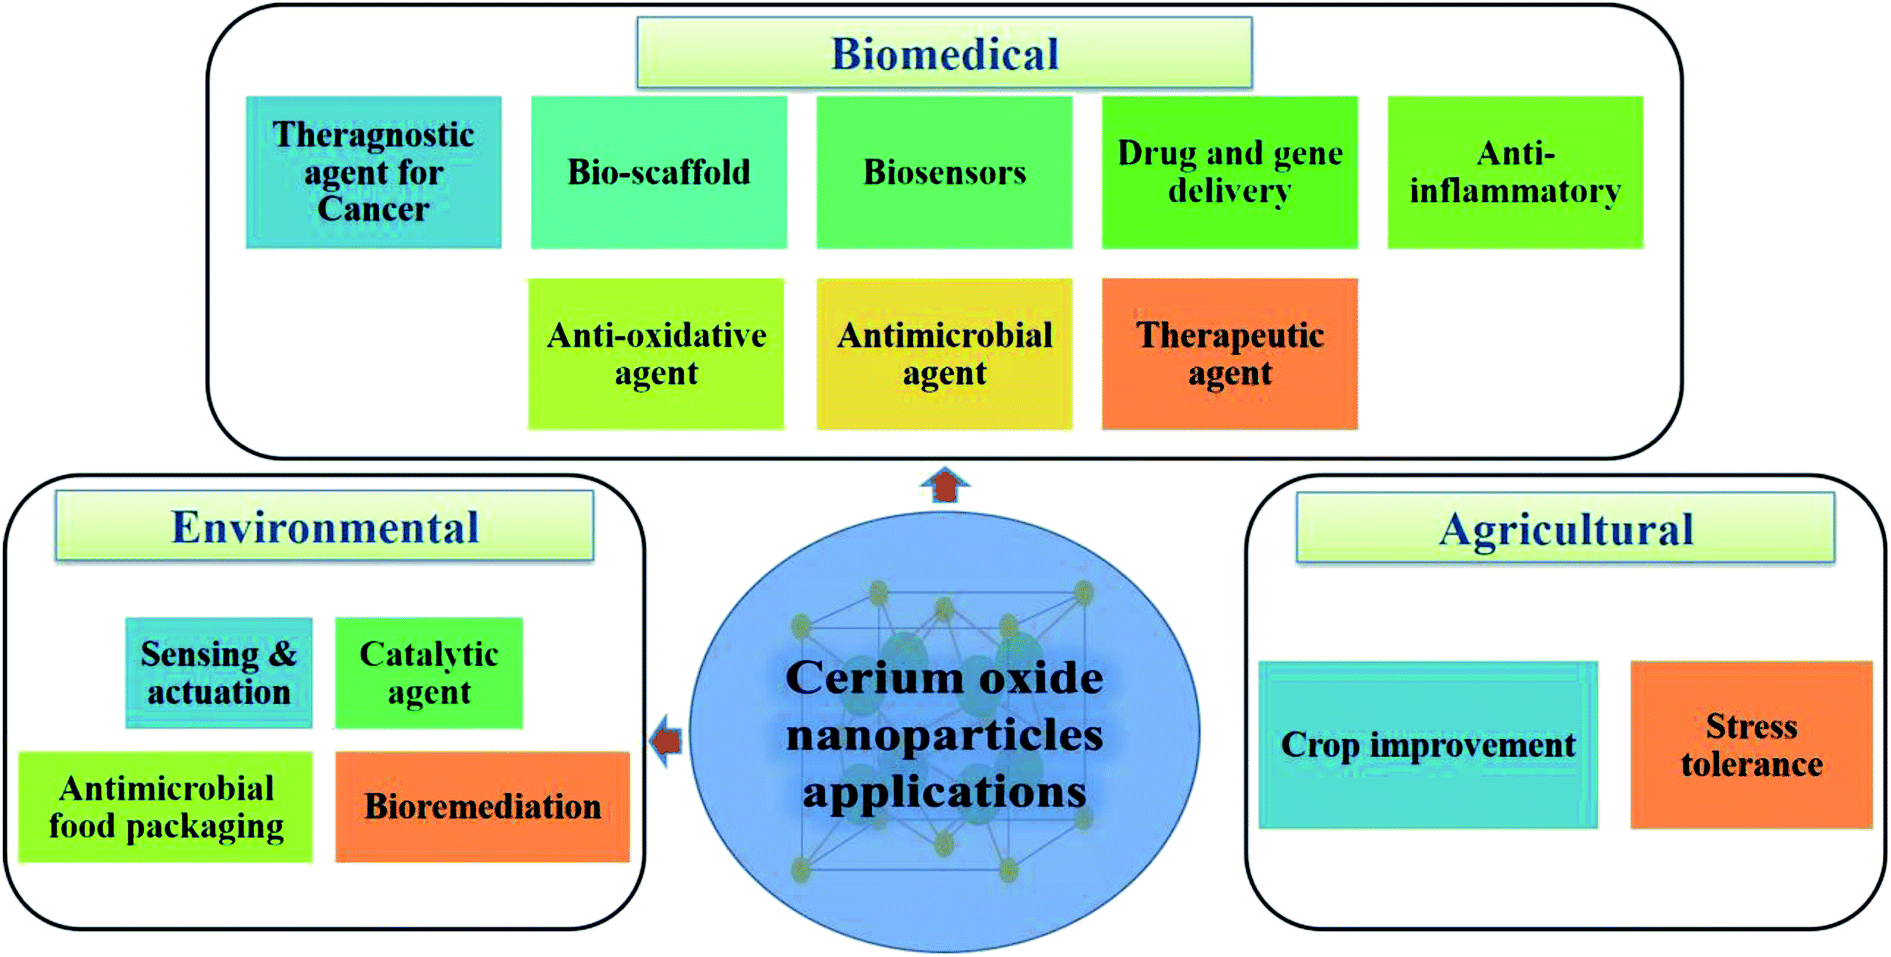 Cerium oxide nanoparticles with antioxidant capabilities and